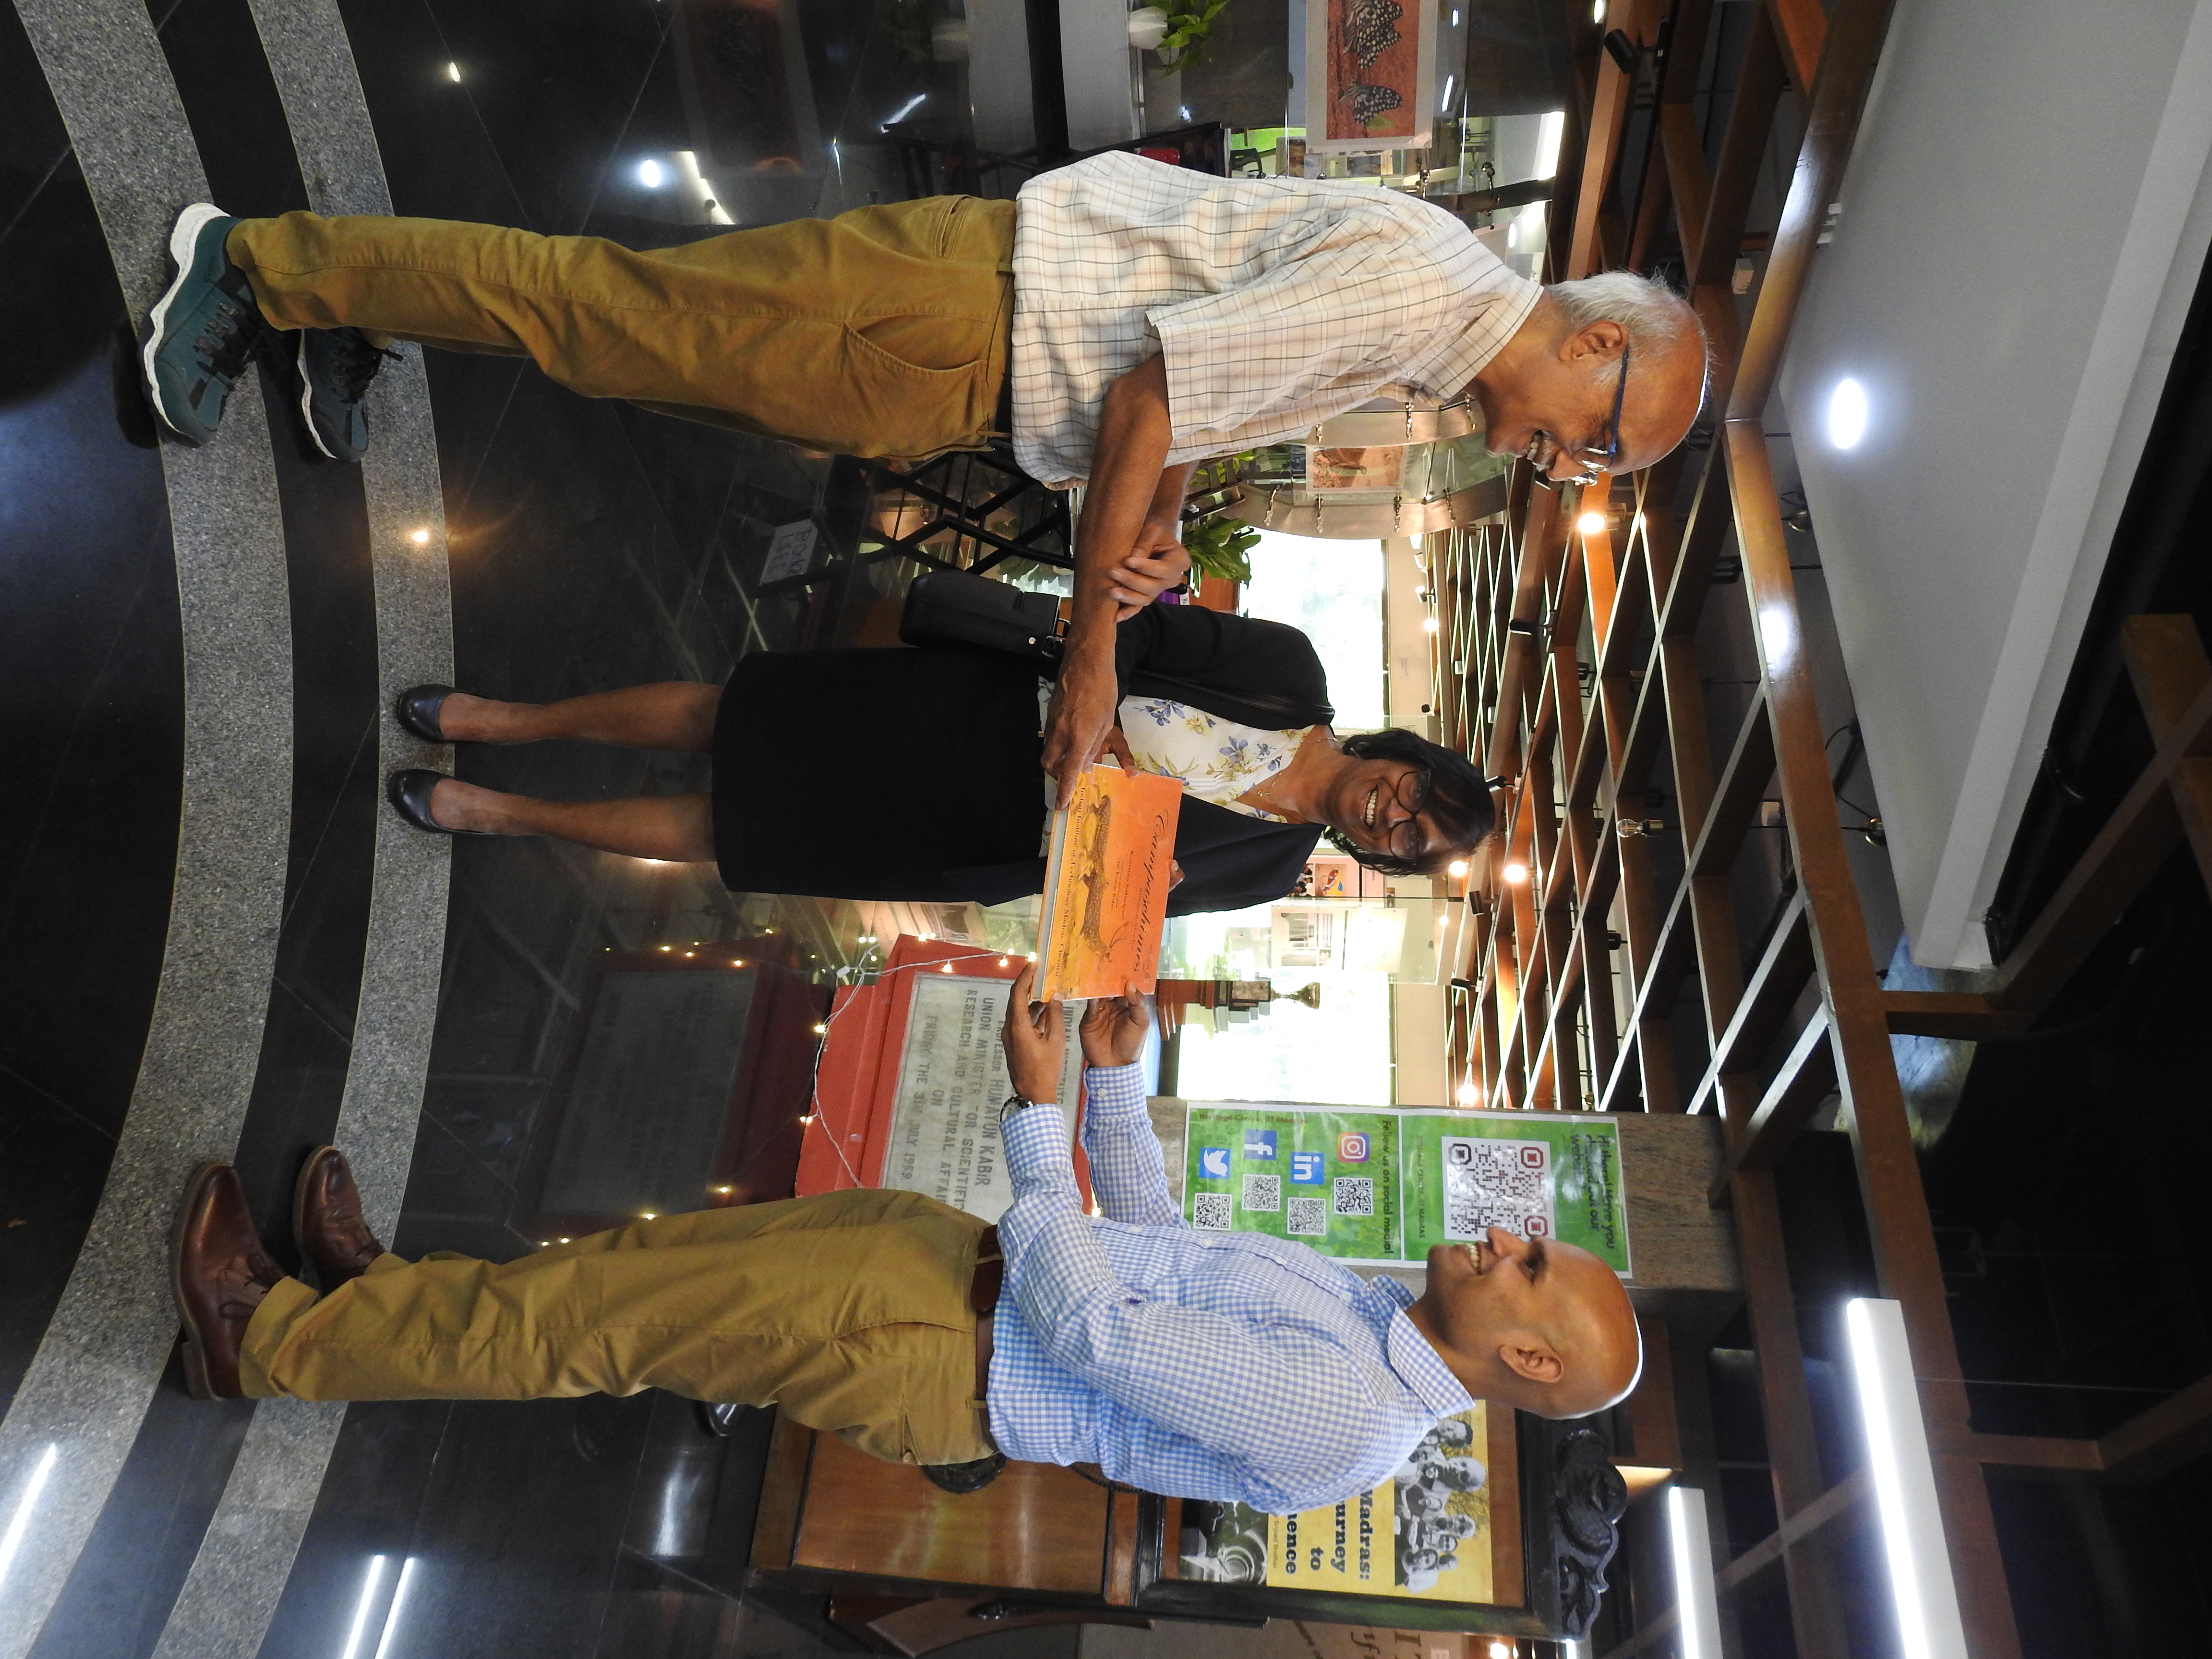 Prof. R. Nagarajan (Professor-in-charge of Heritage Centre, left) presents a copy of Campastimes to the visiting professors from Melbourne University